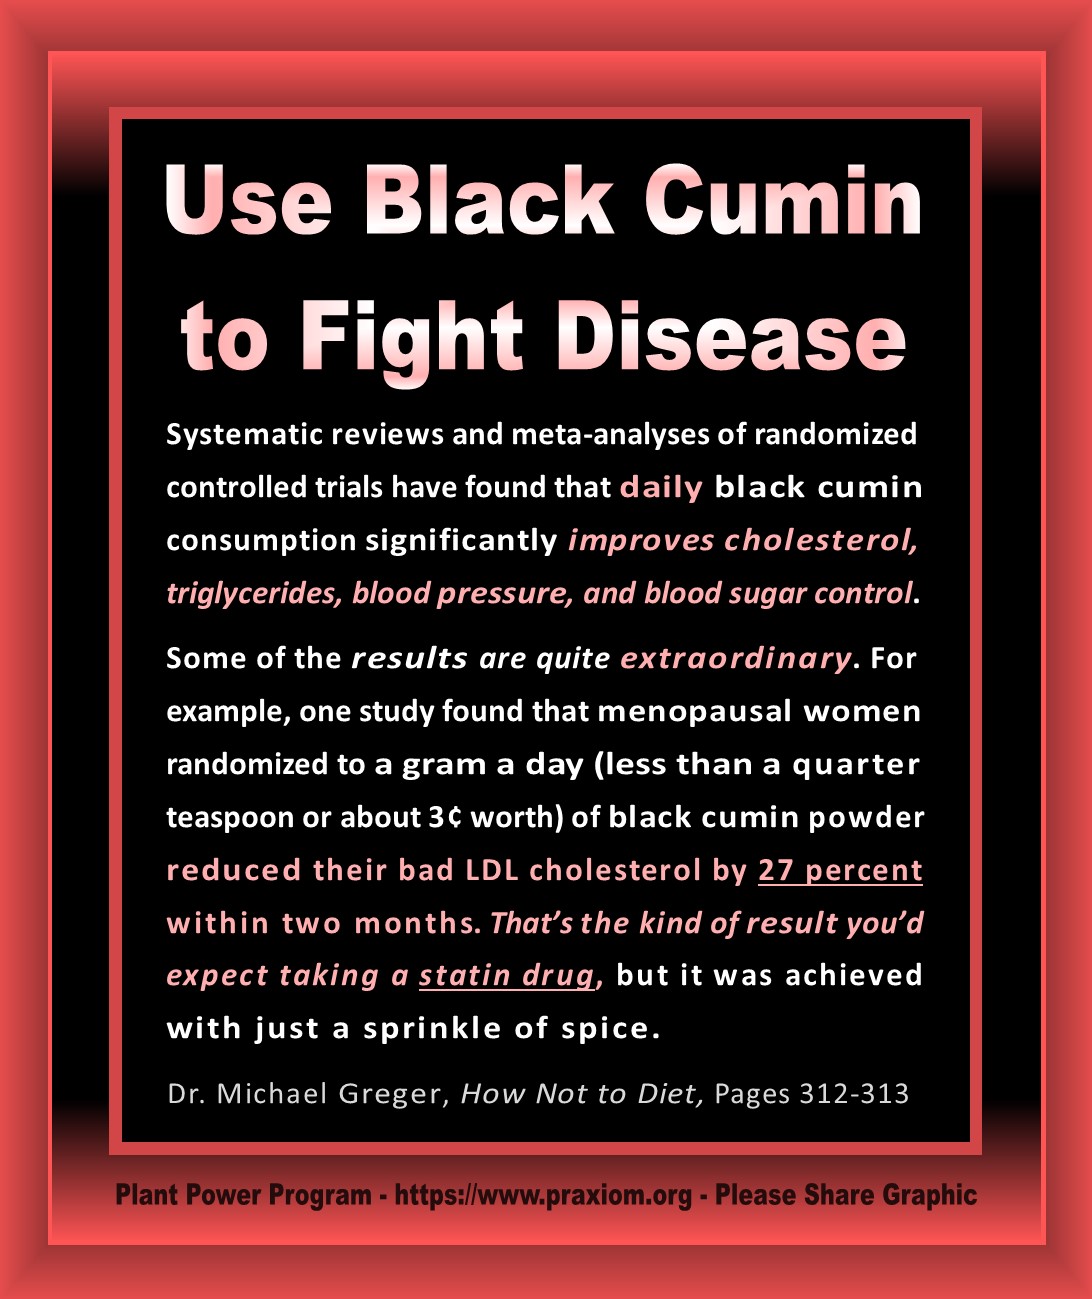 Use Black Cumin to Fight Disease - Dr. Michael Greger